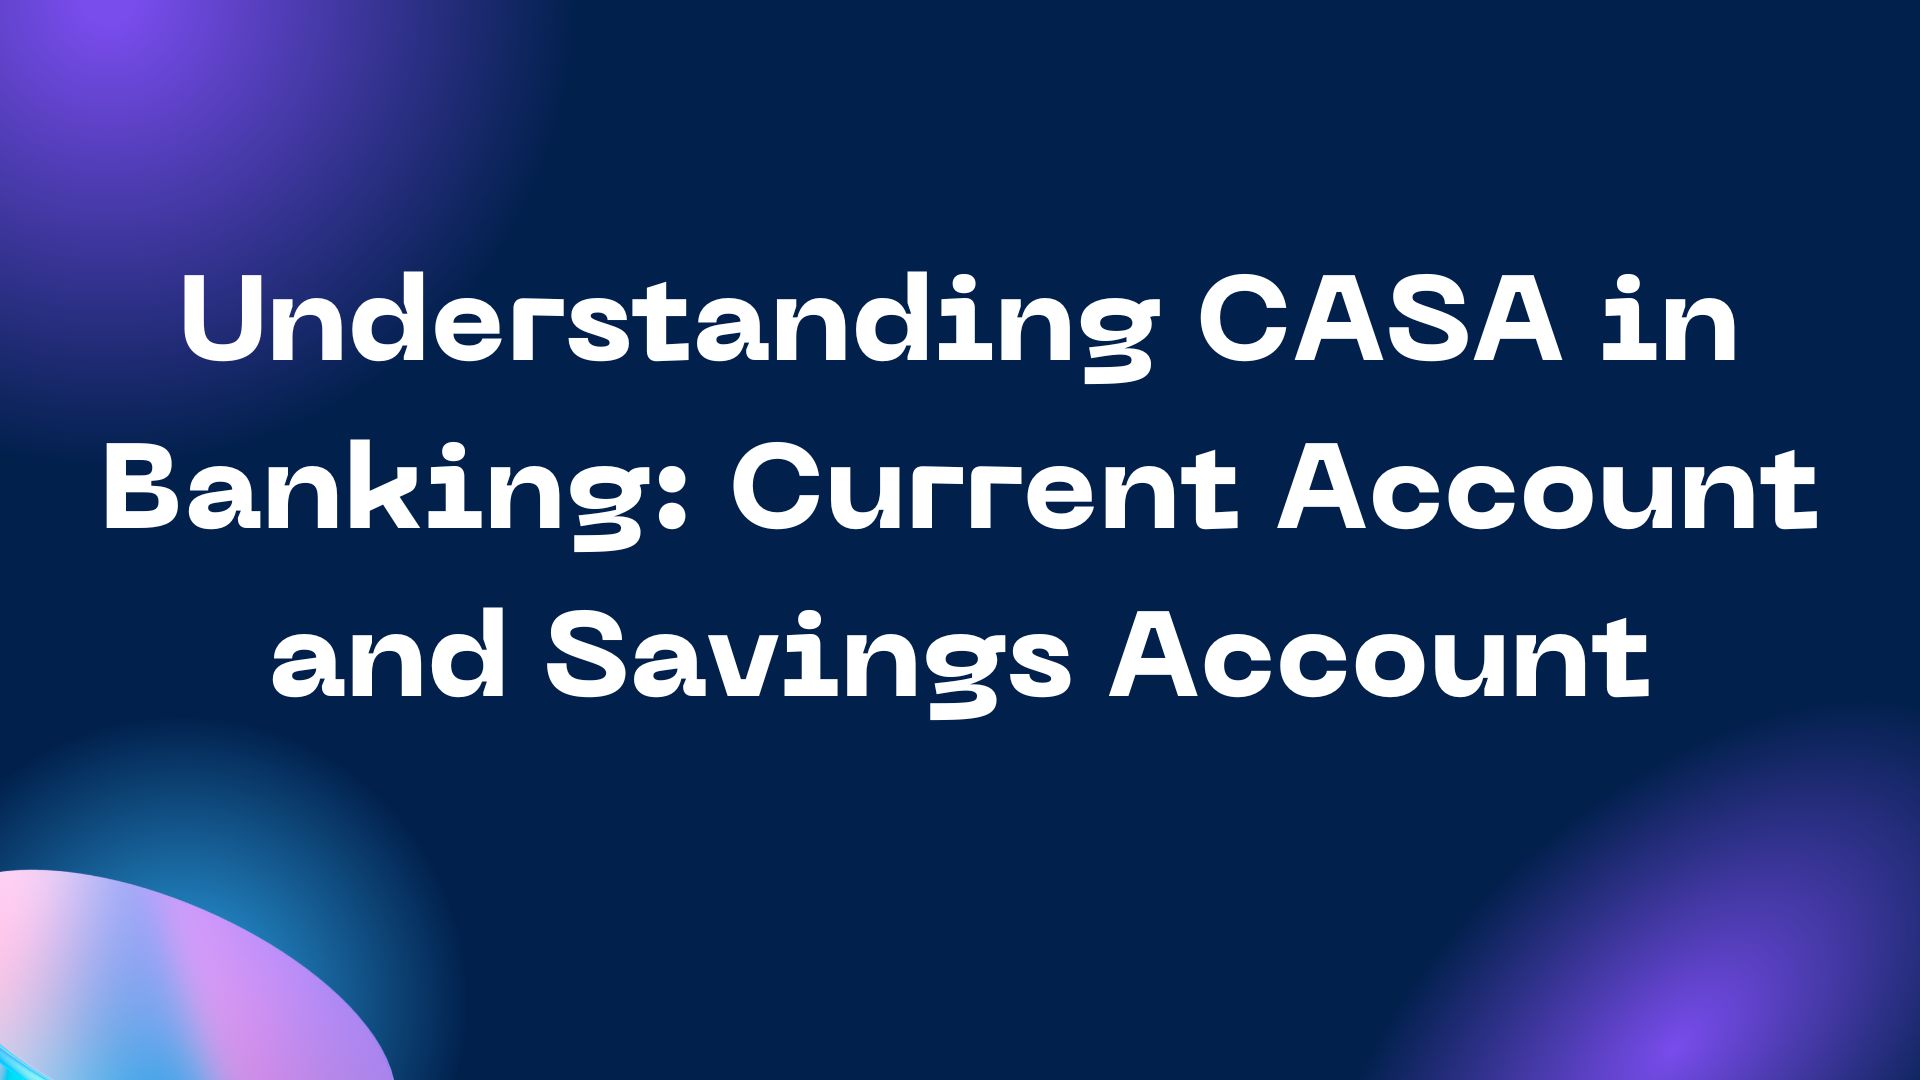 Understanding CASA in Banking: Current Account and Savings Account